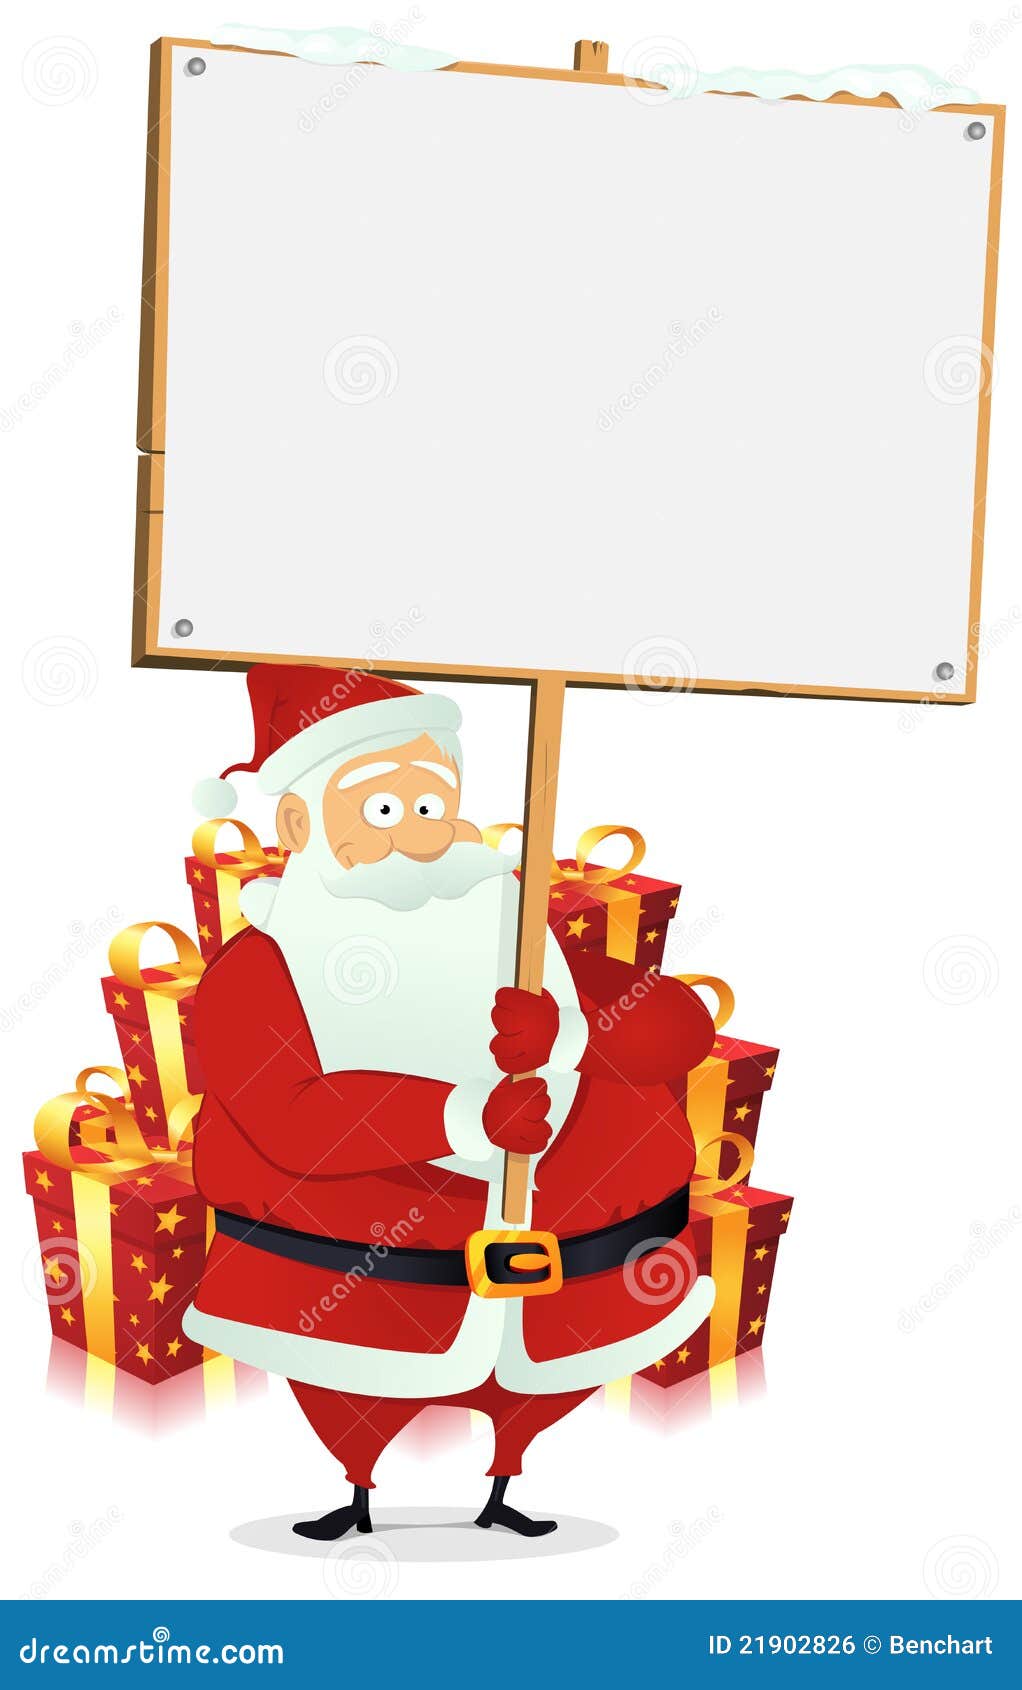 Merry Christmas : Santa Claus Holding Wood Sign Royalty Free Stock 